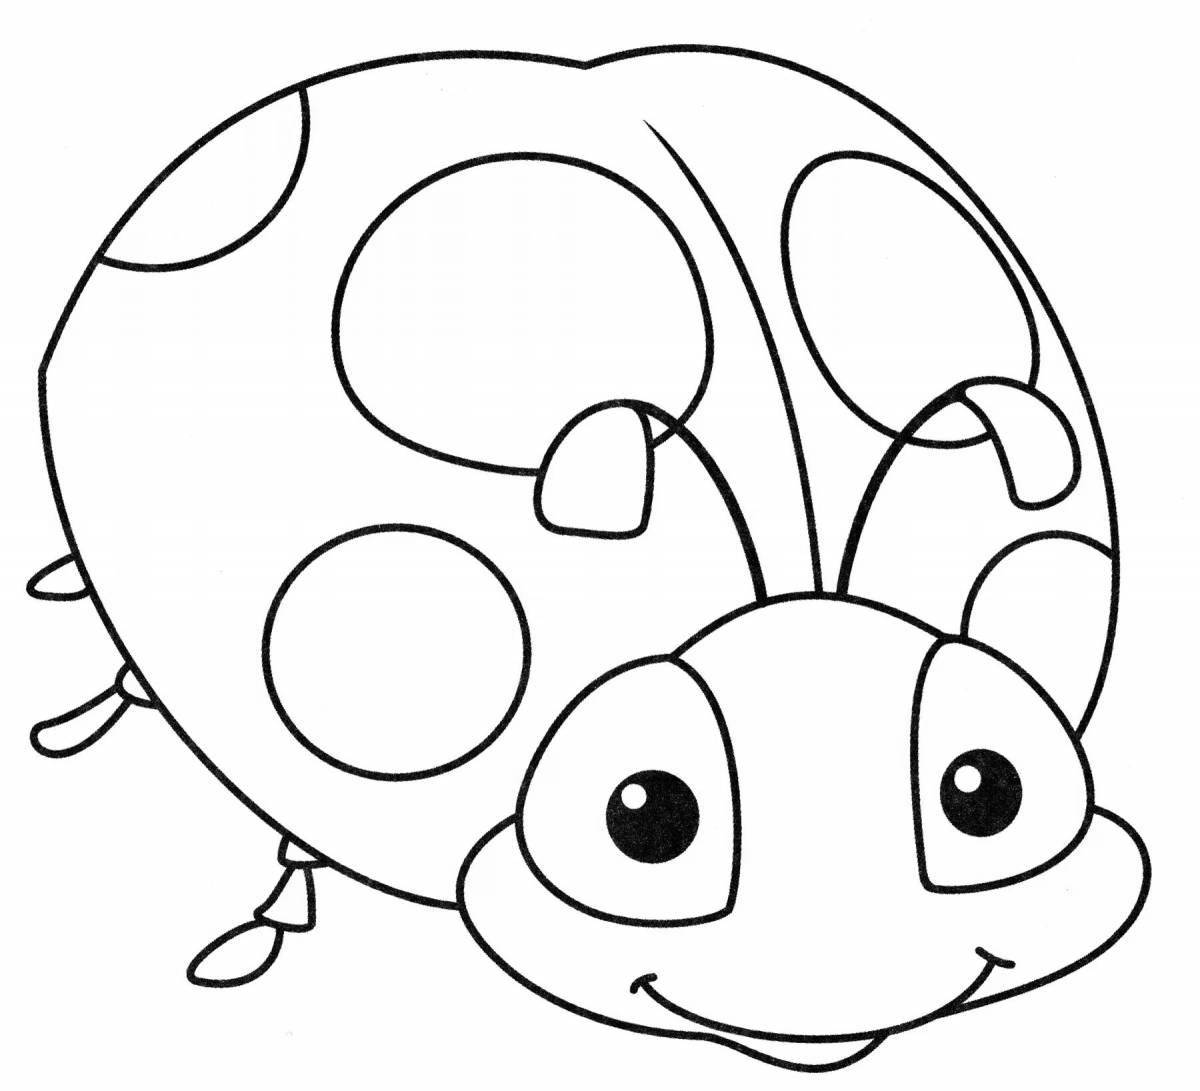 A fun coloring book for preschoolers with a ladybug